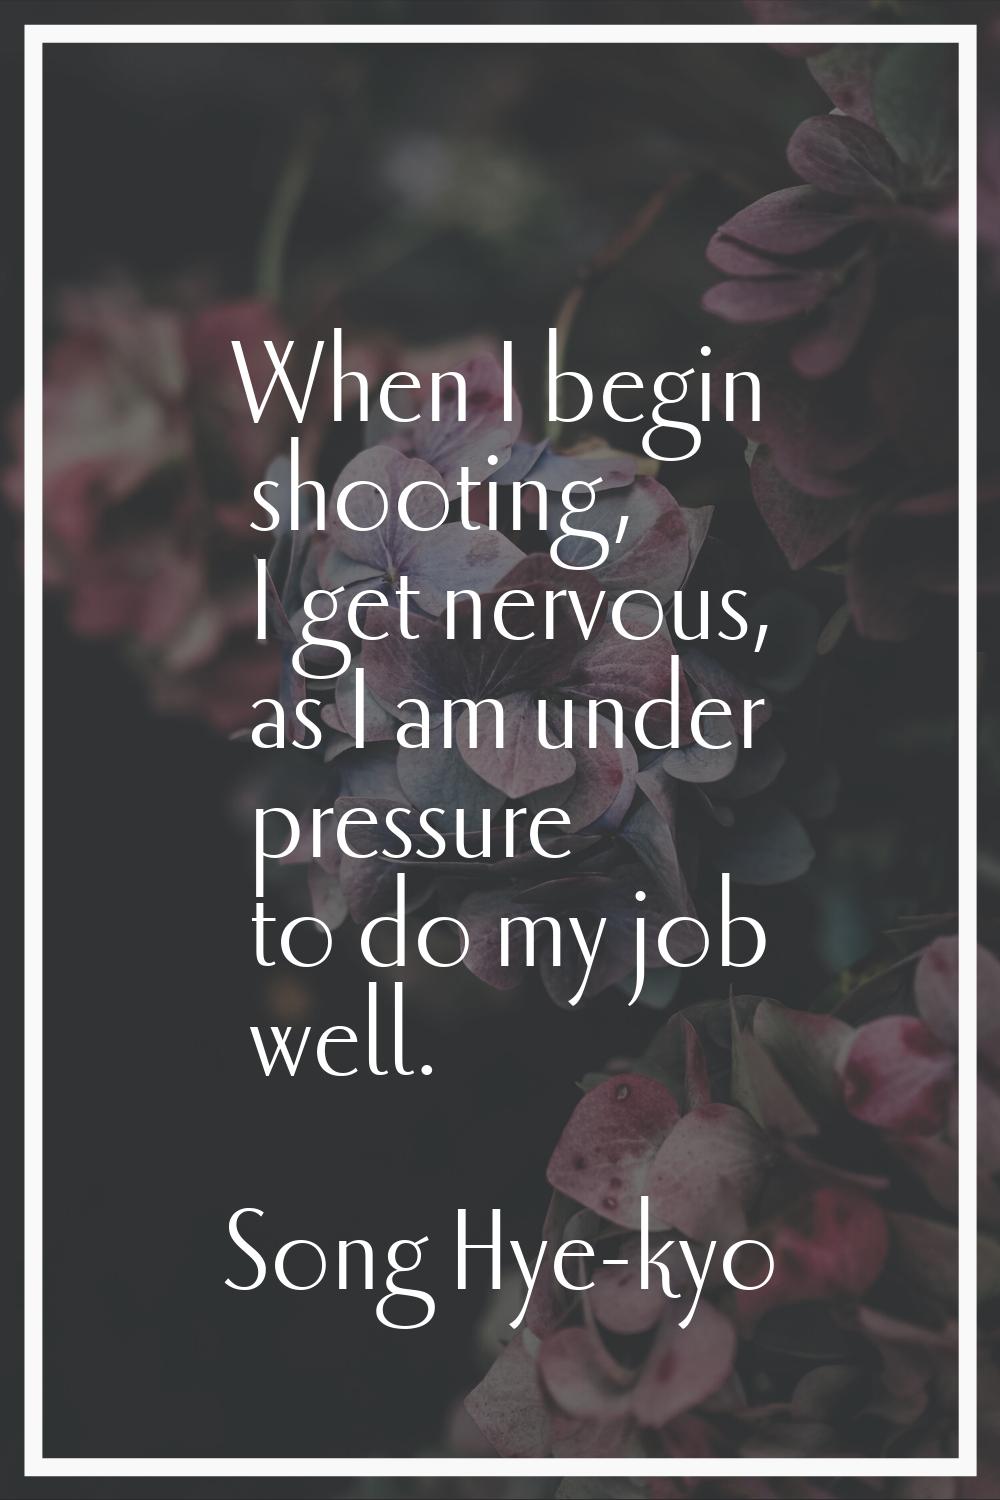 When I begin shooting, I get nervous, as I am under pressure to do my job well.